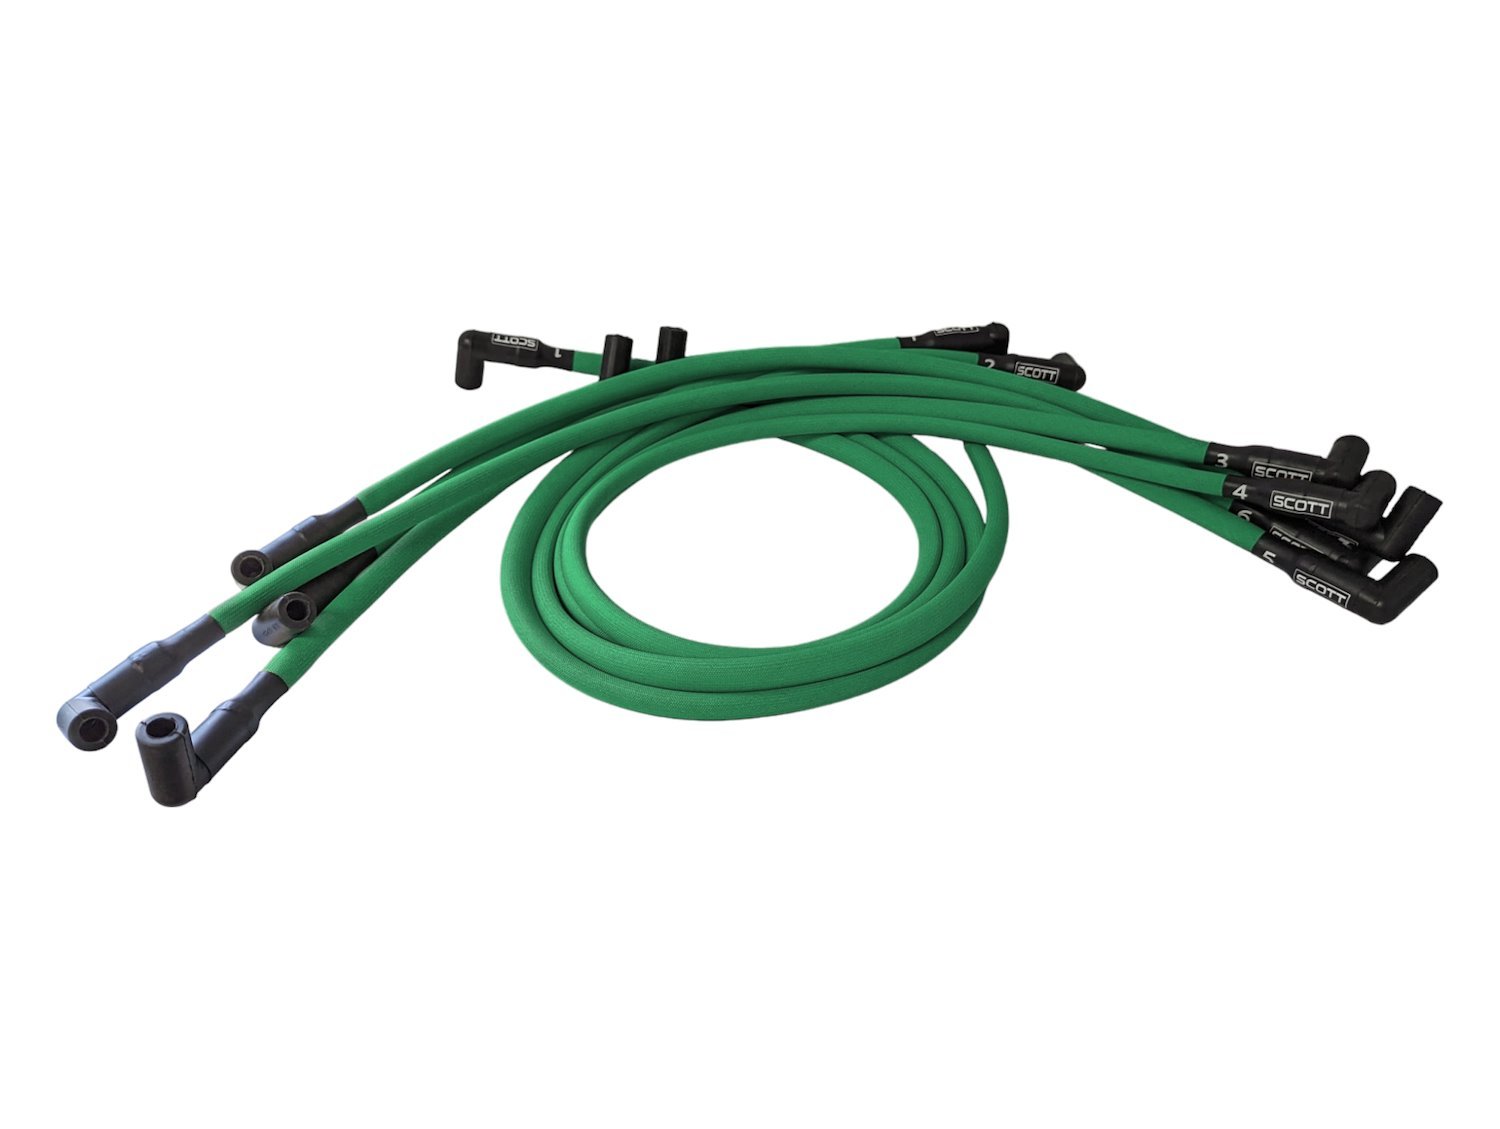 SPW-PS-402-4 High-Performance Fiberglass-Oversleeved Spark Plug Wire Set for Small Block Chevy, Over Valve Cover [Green]